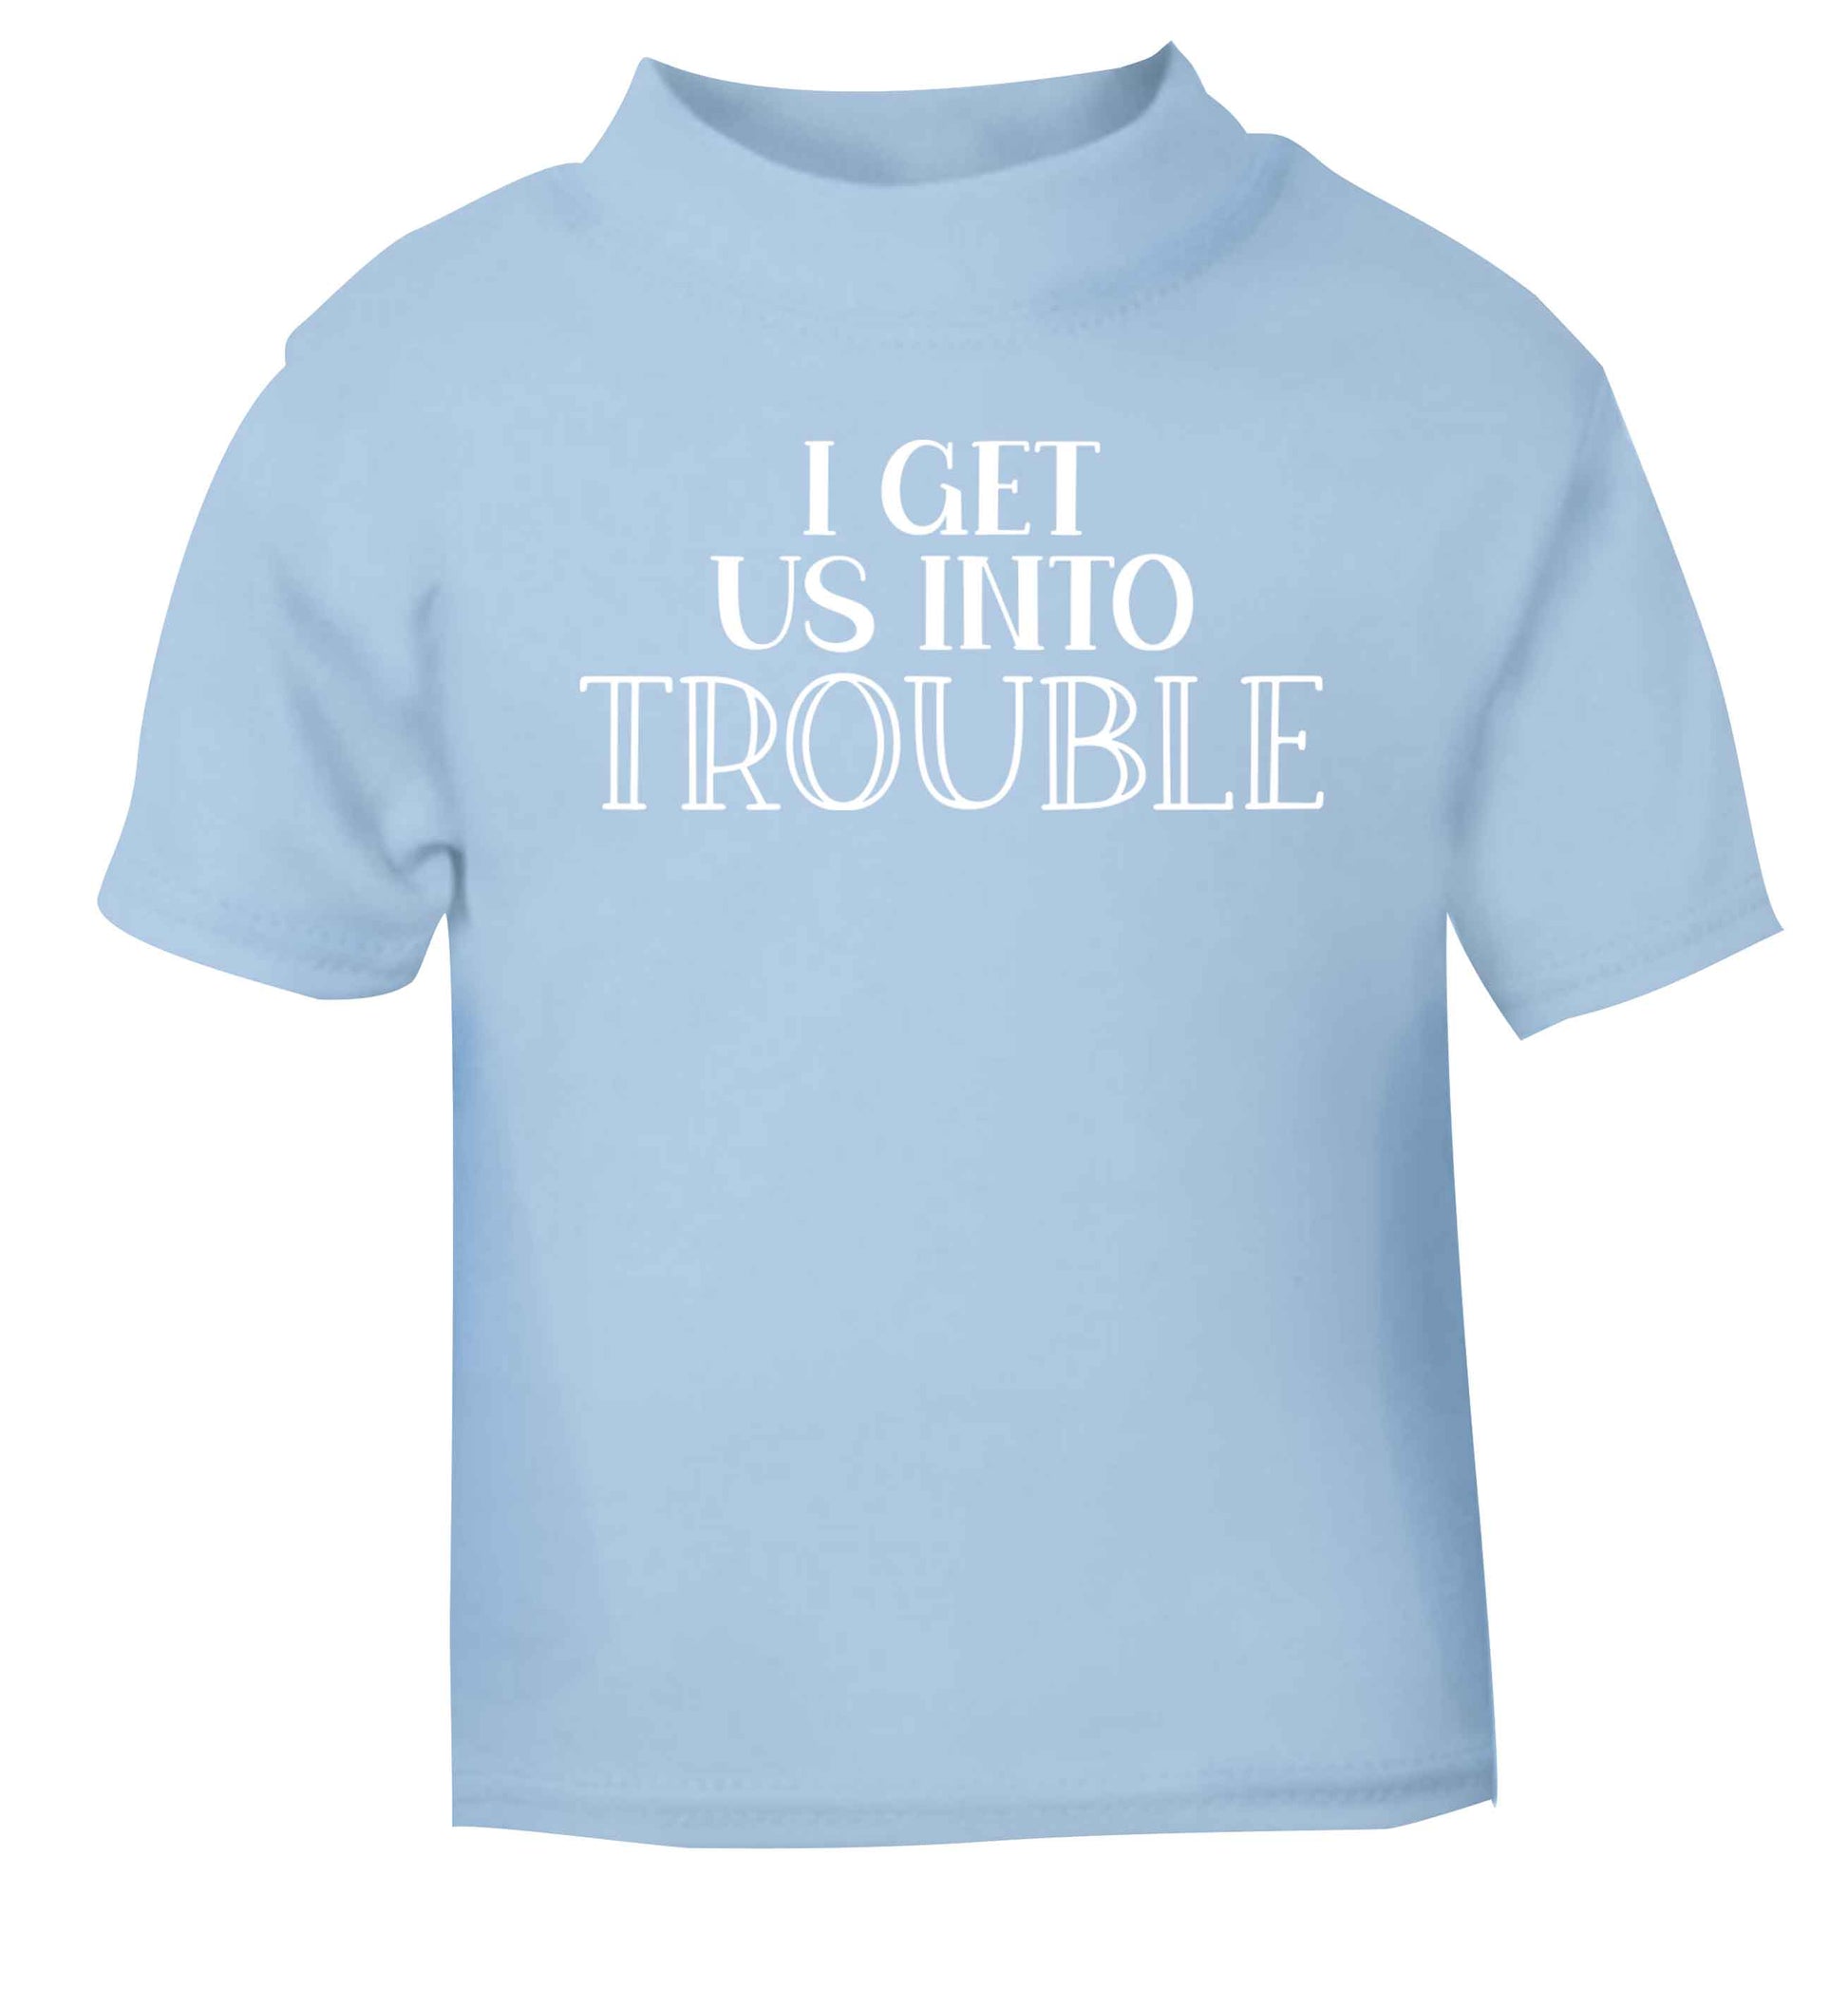 I get us into trouble light blue baby toddler Tshirt 2 Years